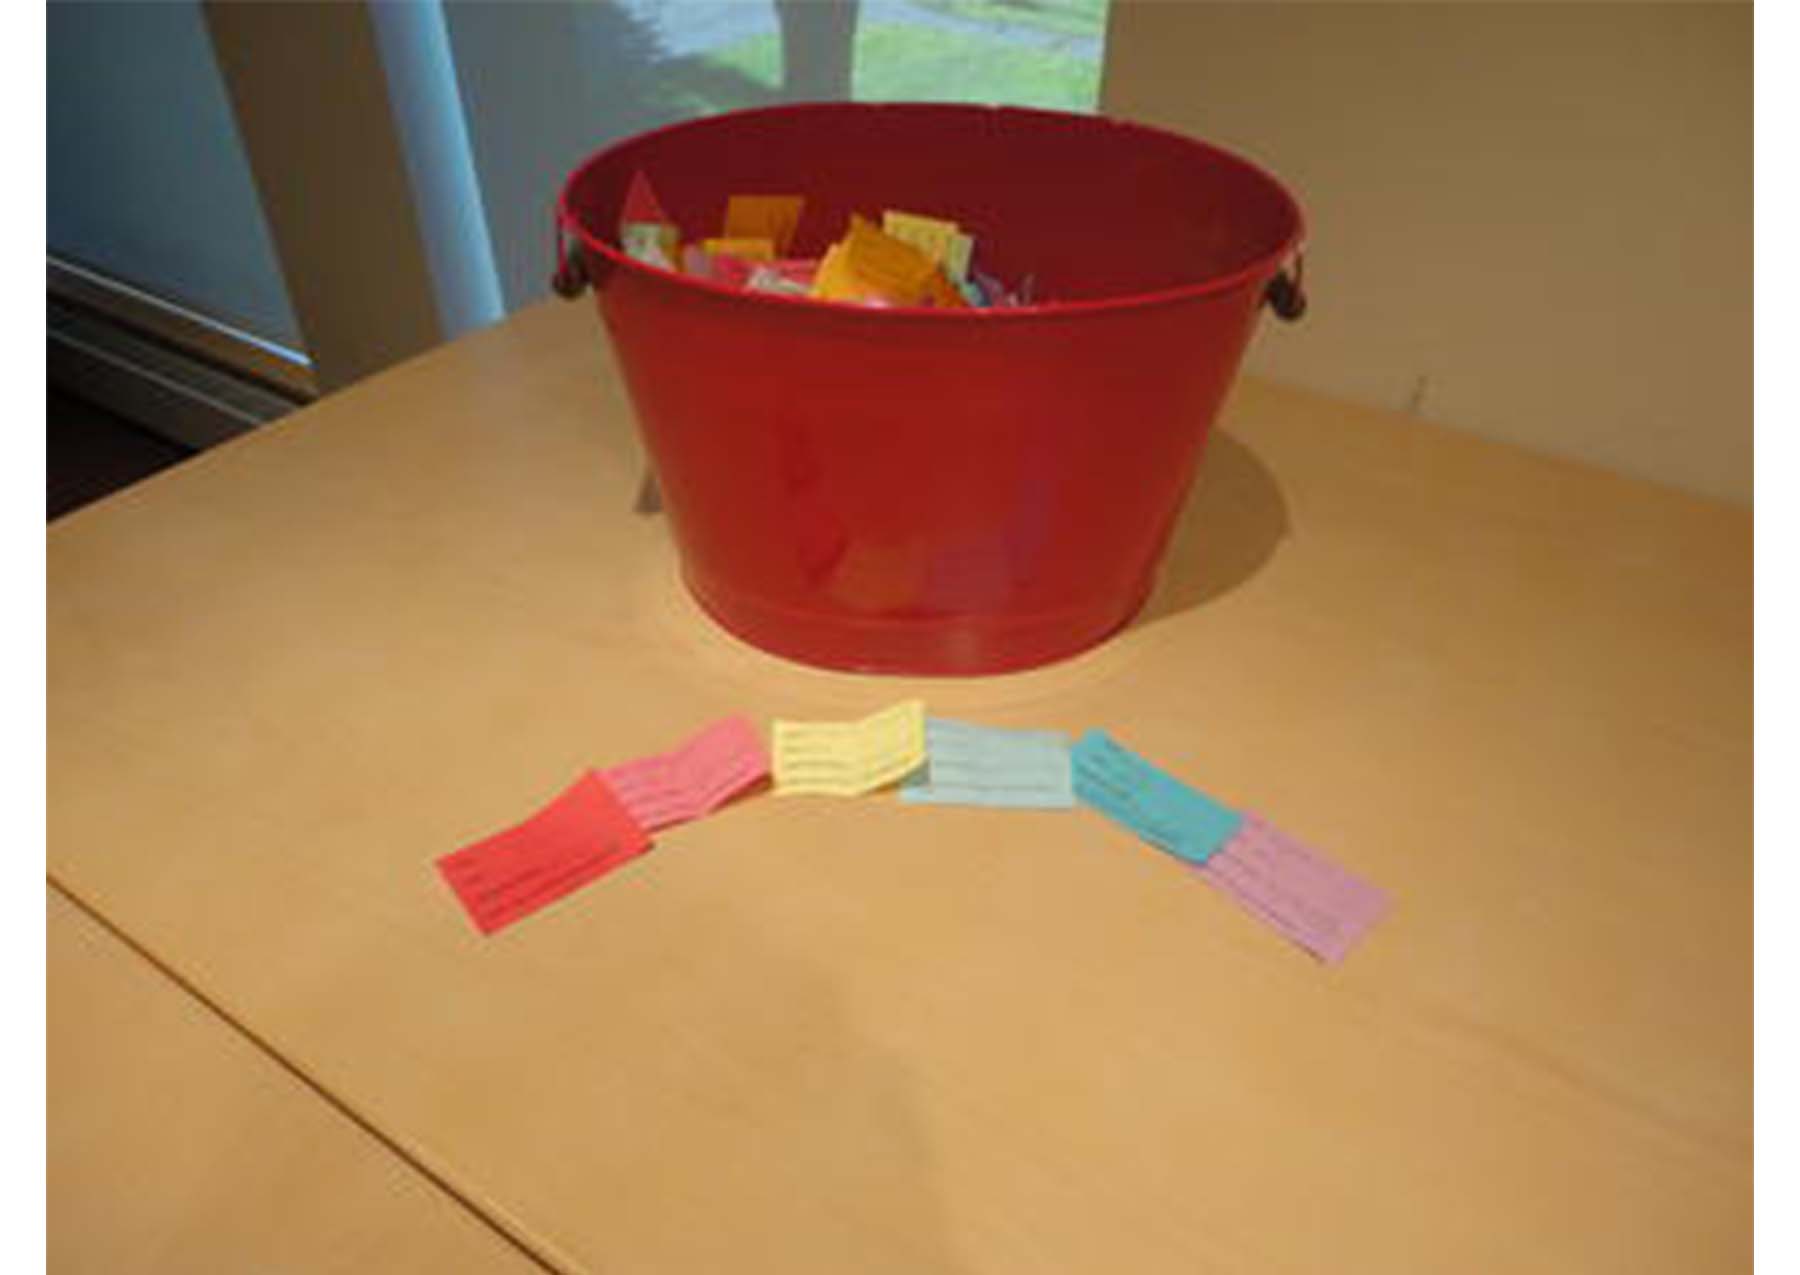 large red bucket with multicolored slips of paper inside of it, sitting on a wooden table. six slips of paper arranged on the table in an arc in rainbow order